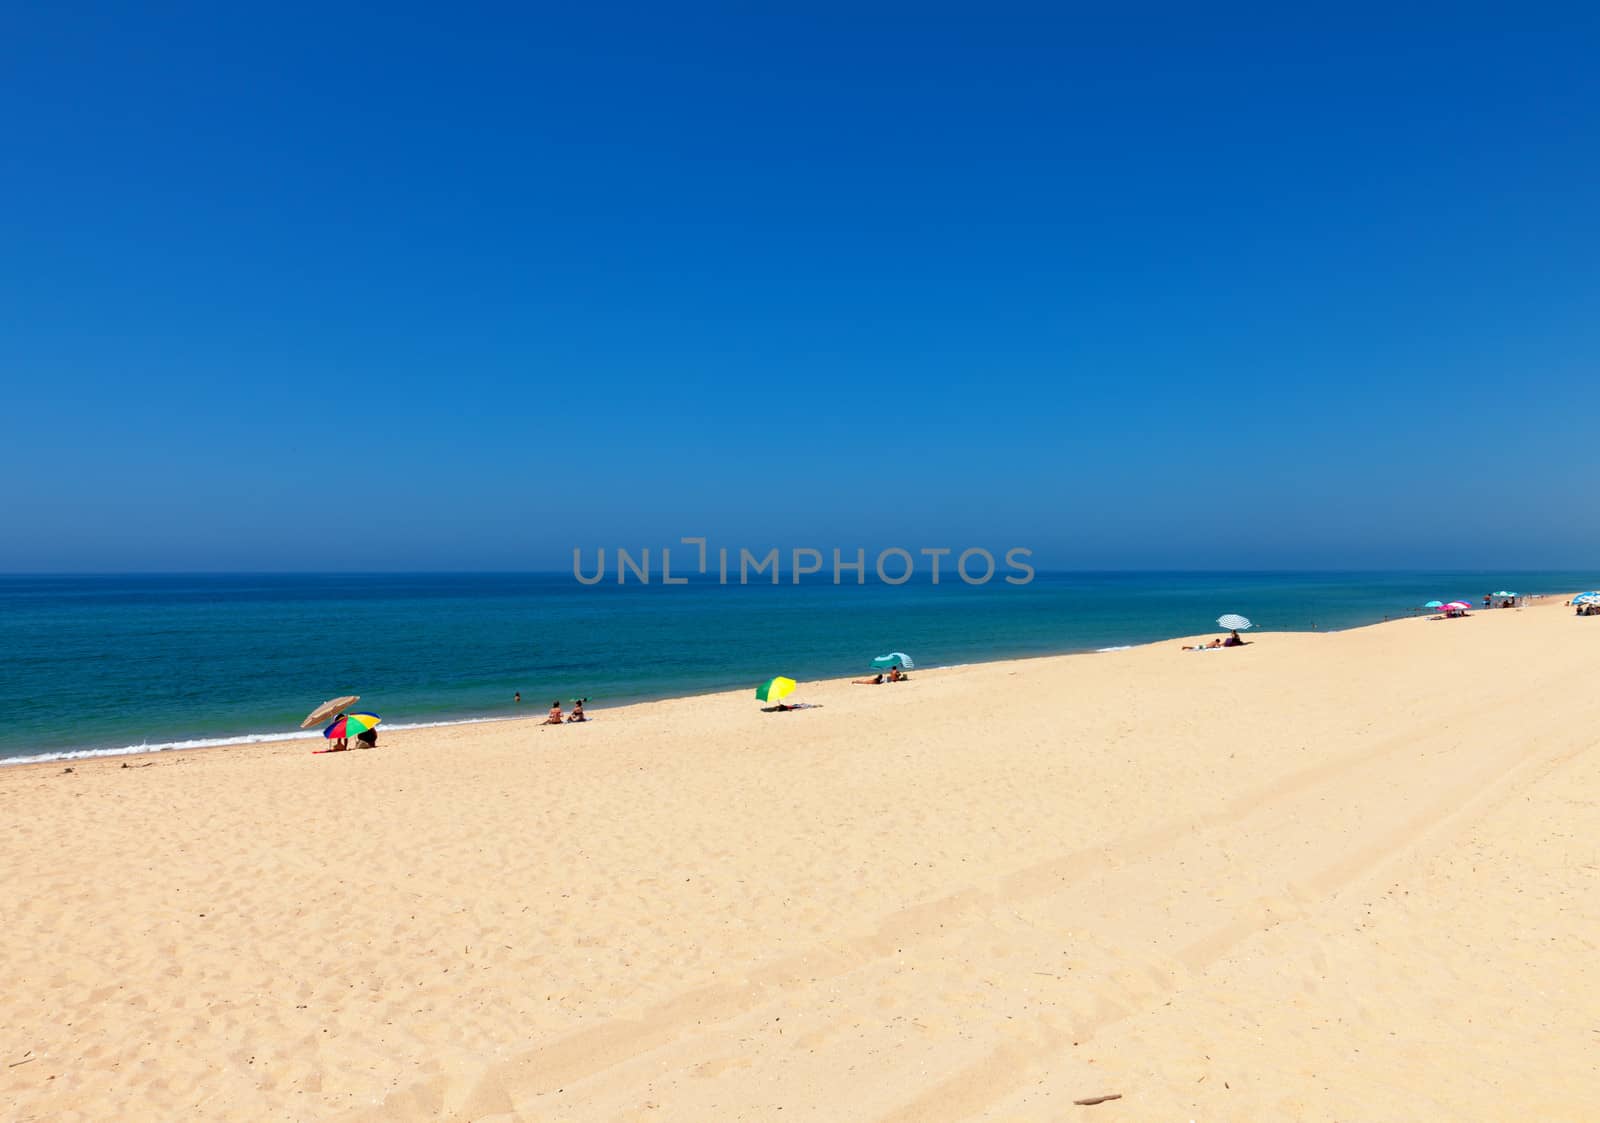 Beautiful tropical beach with bathers relaxing on an expanse of golden sand alongside a calm blue ocean in the summer sun